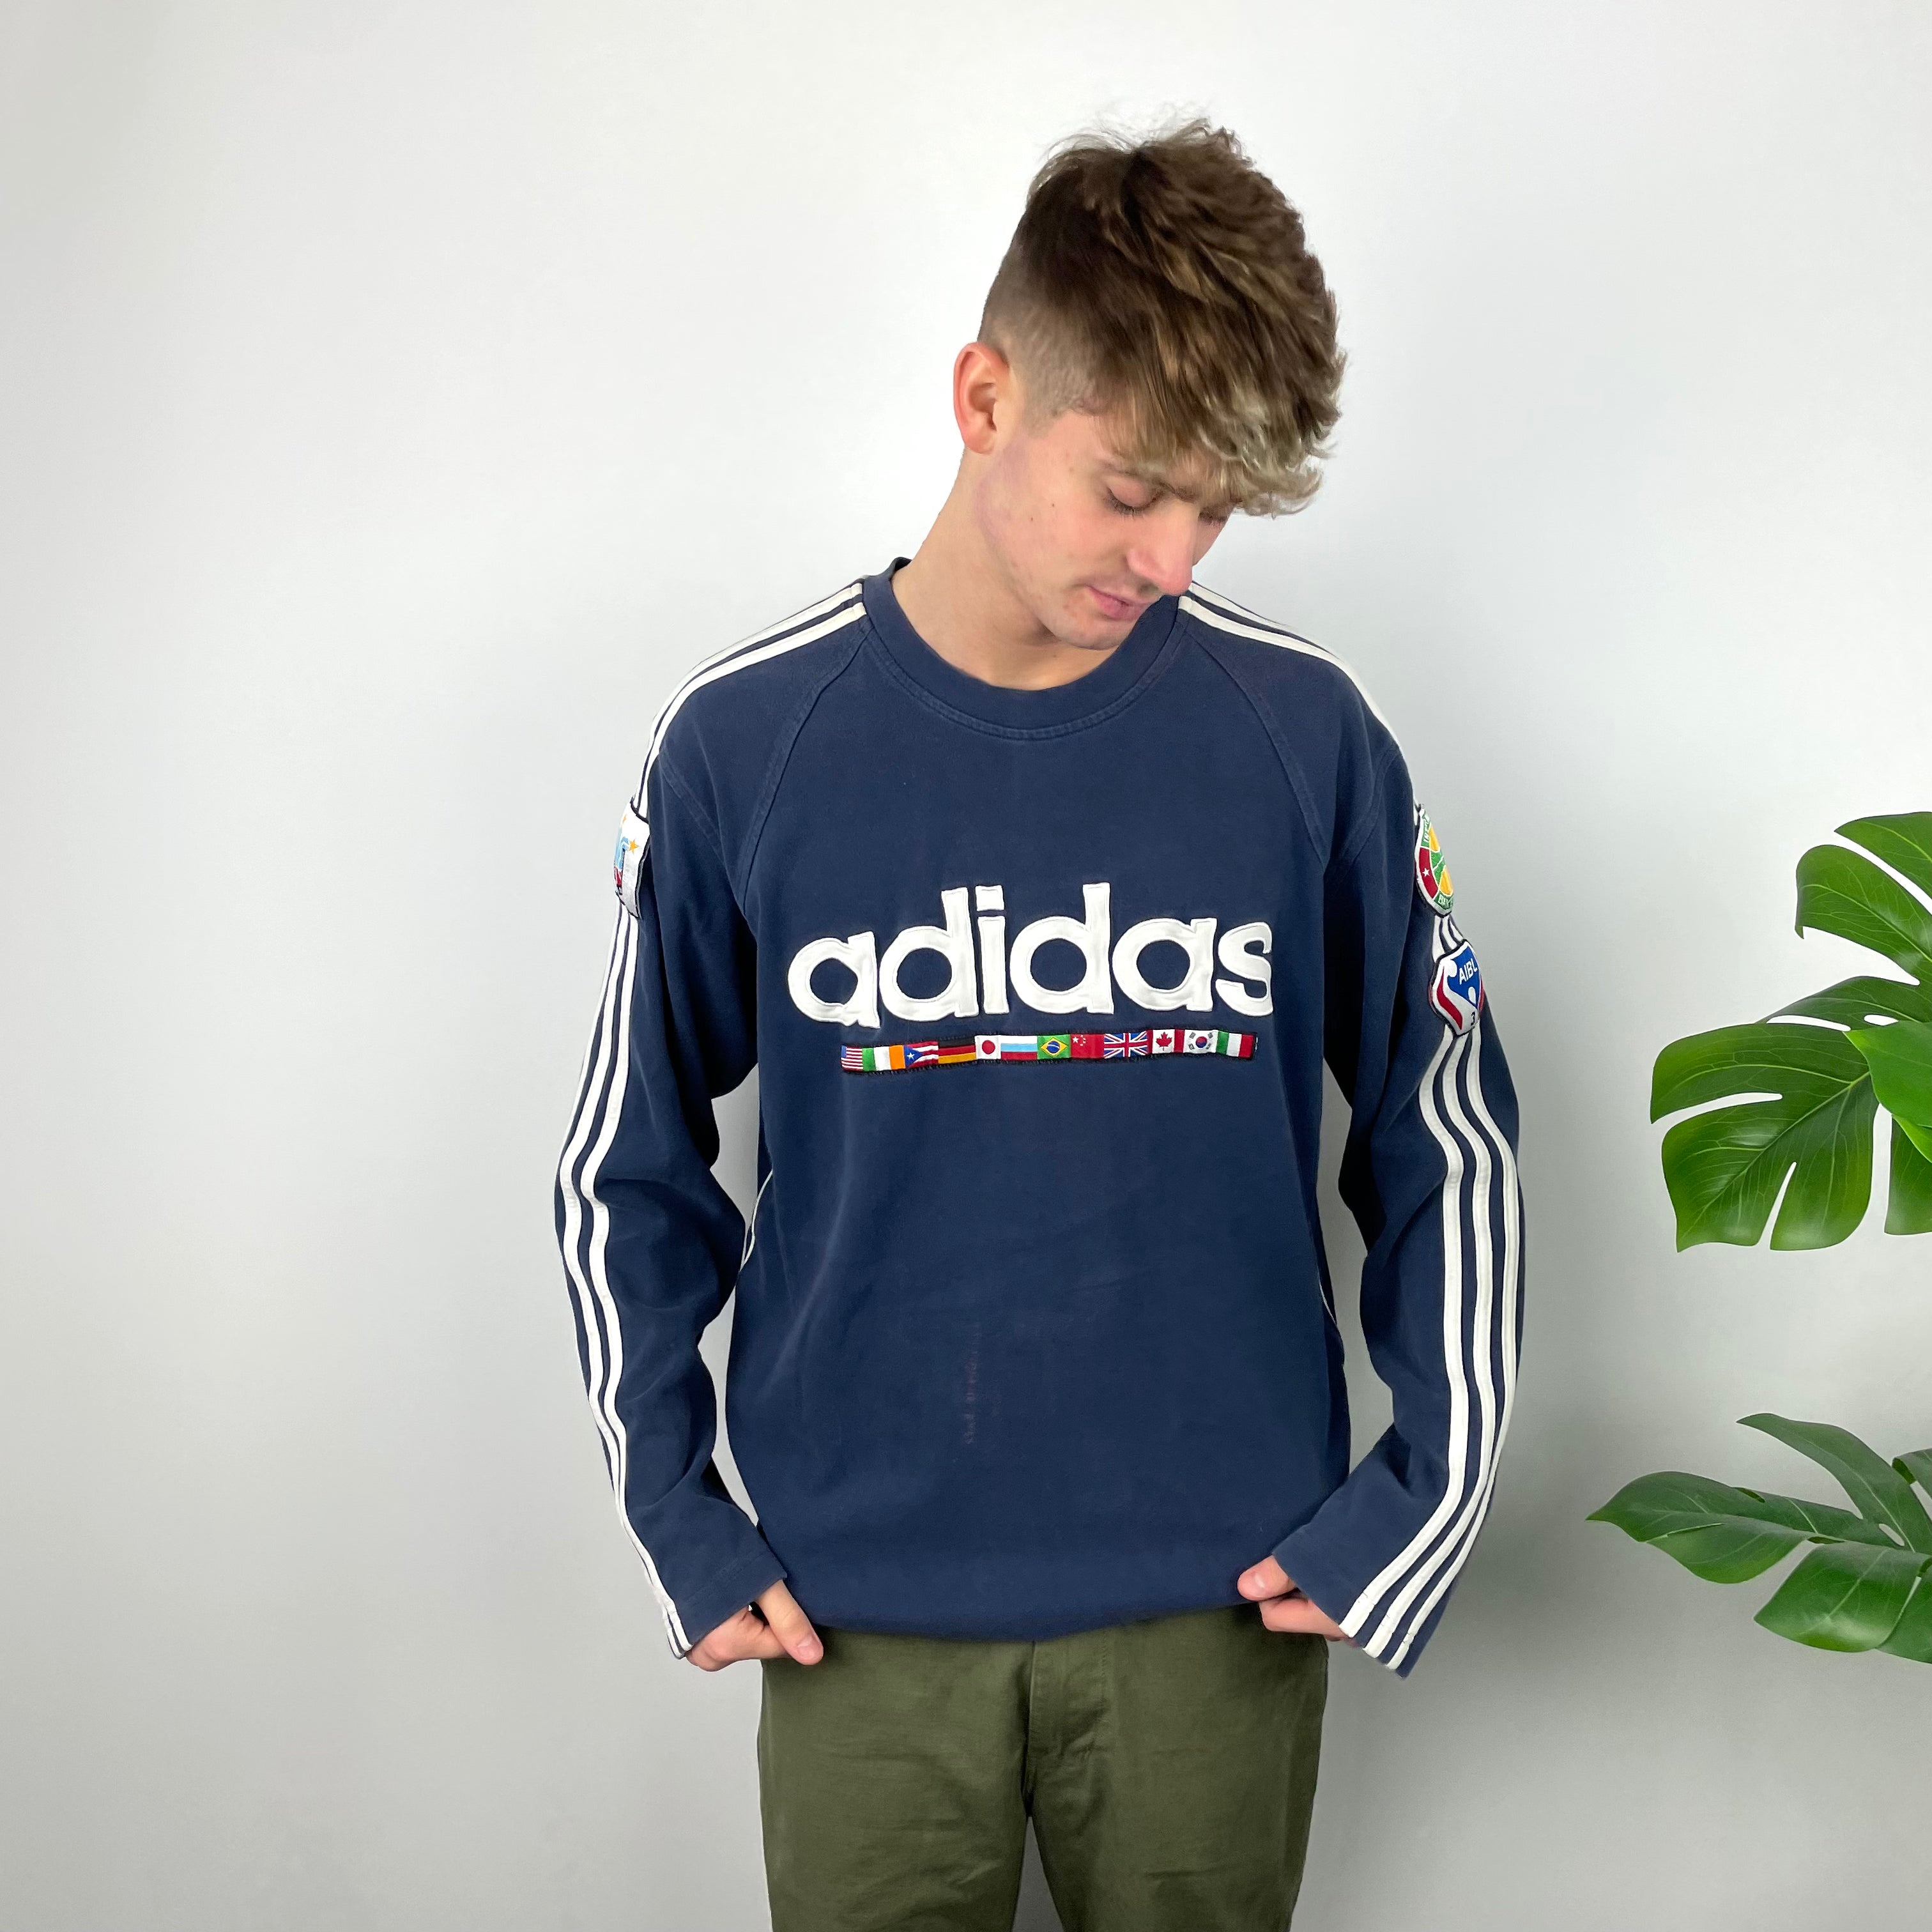 Adidas RARE Navy Embroidered Spell Out Sweatshirt (XL)